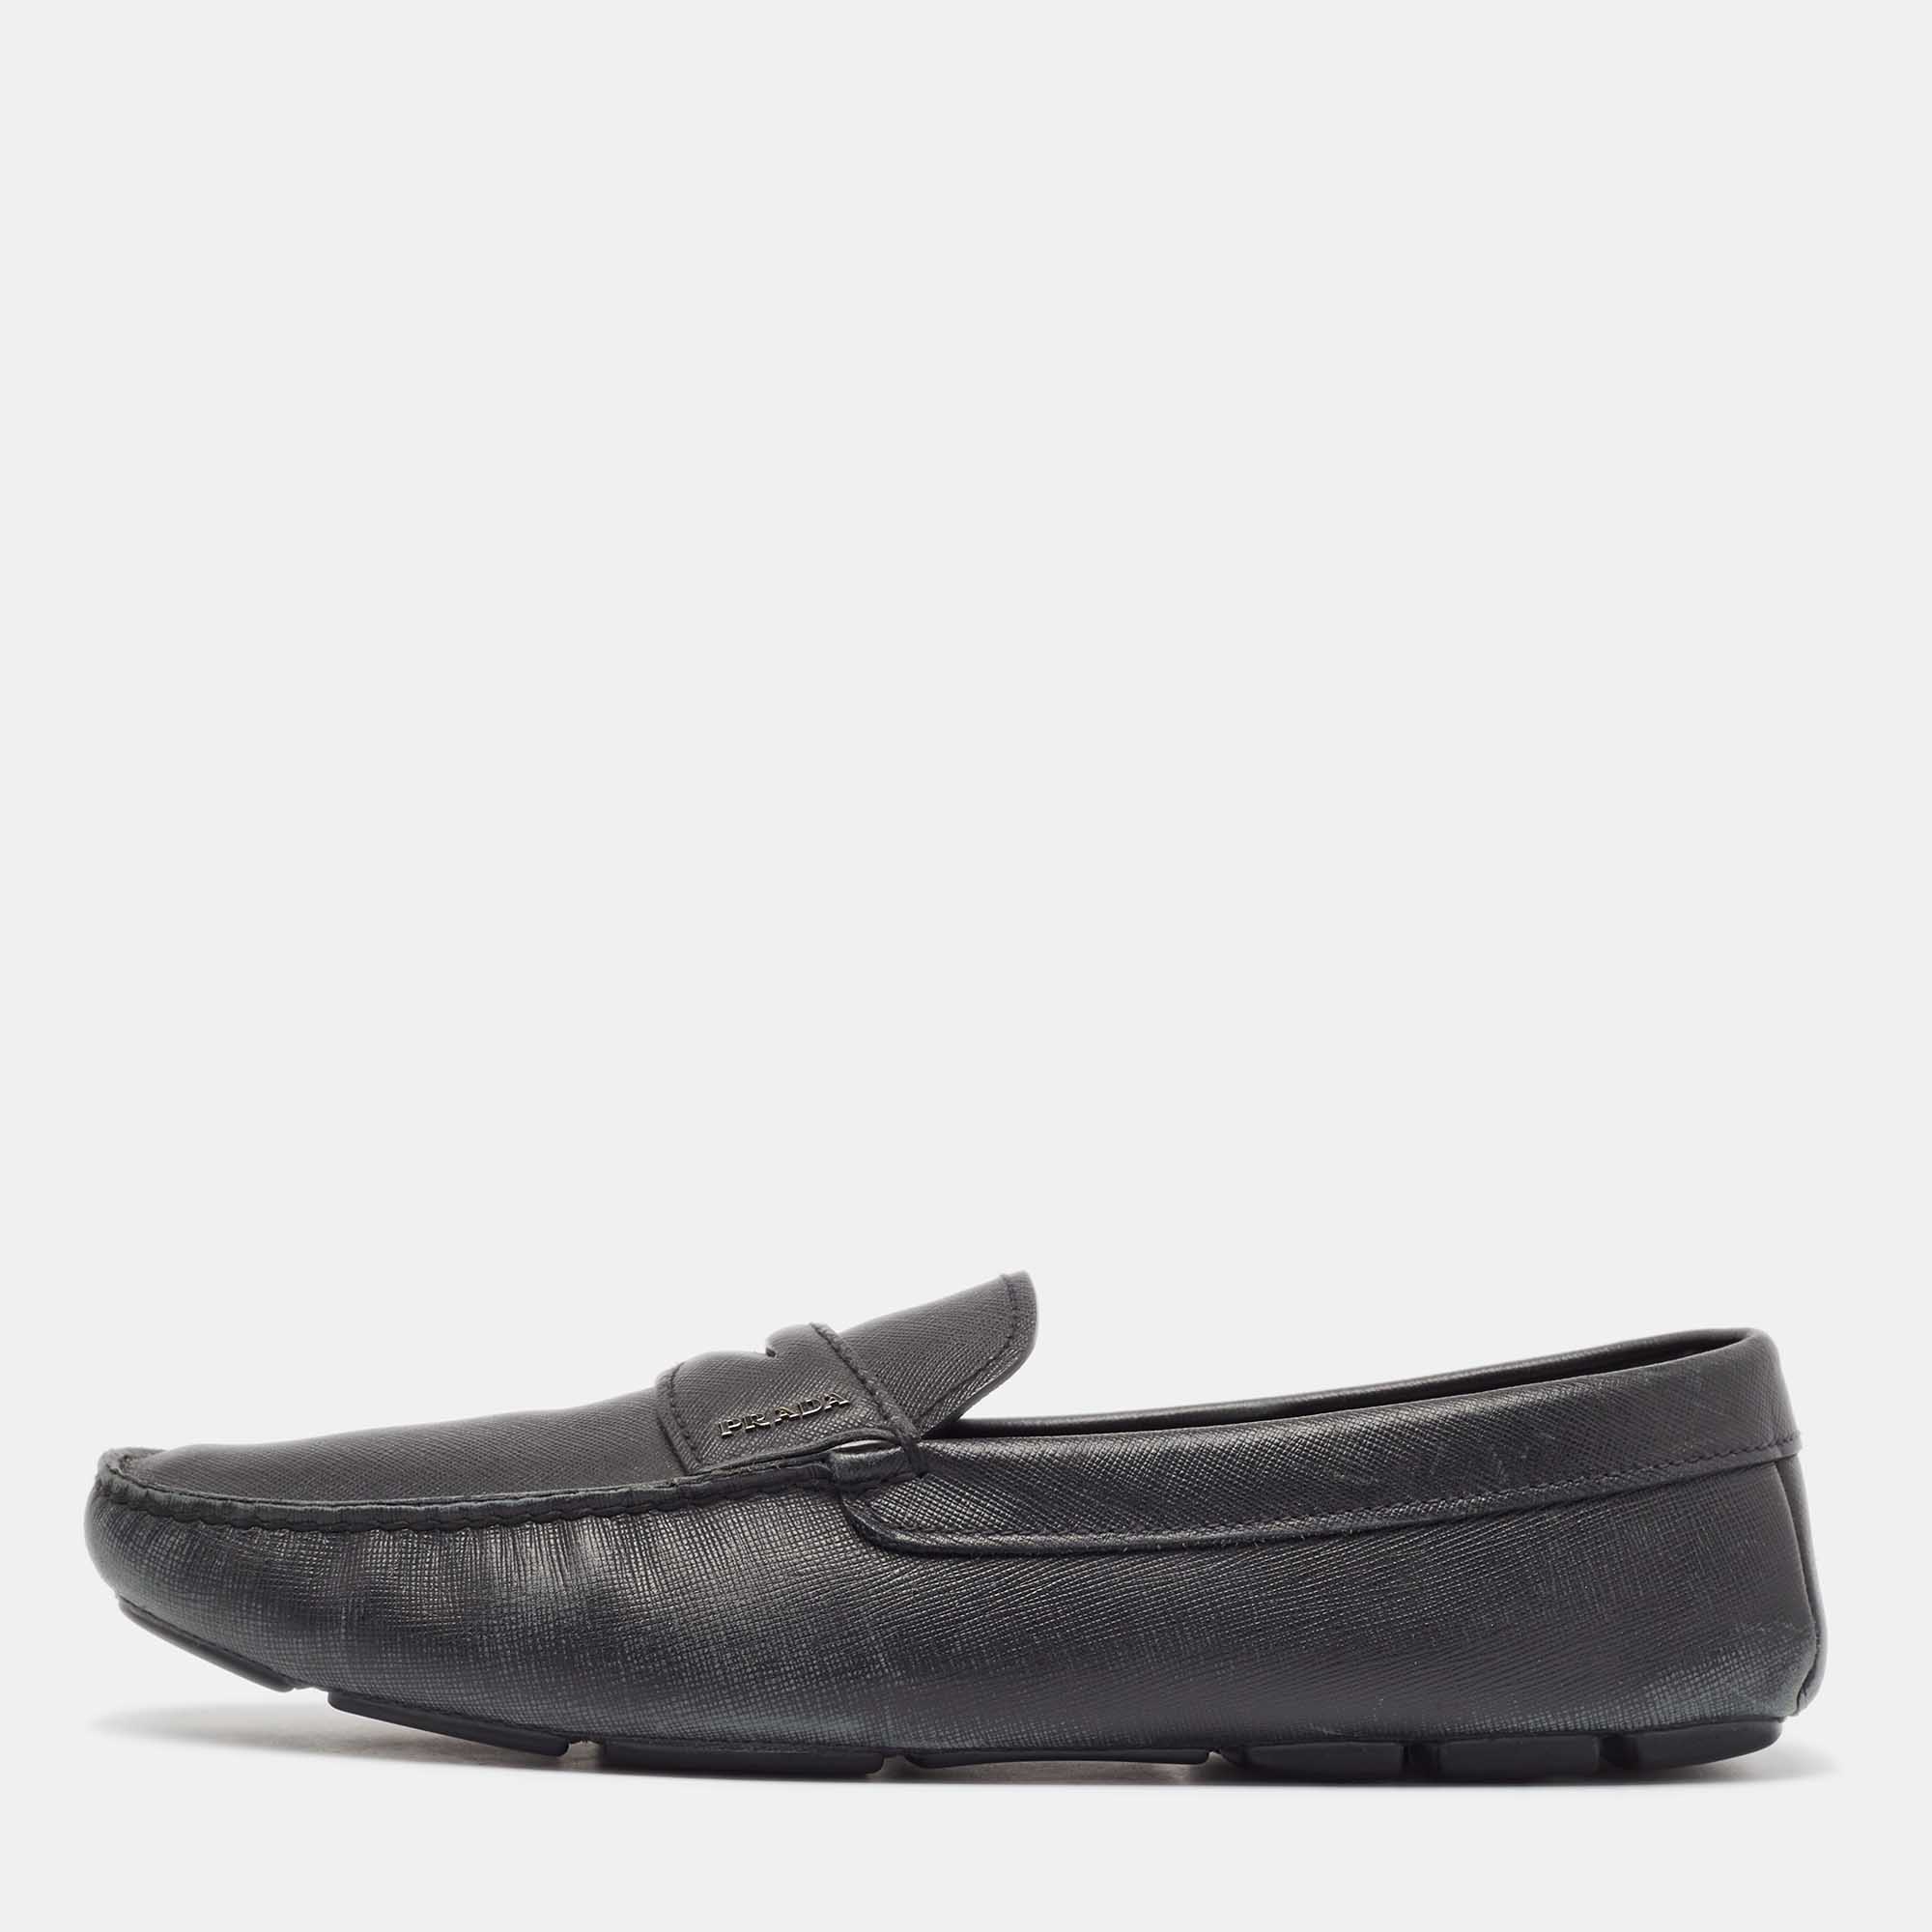 Pre-owned Prada Black Leather Slip On Loafers Size 46